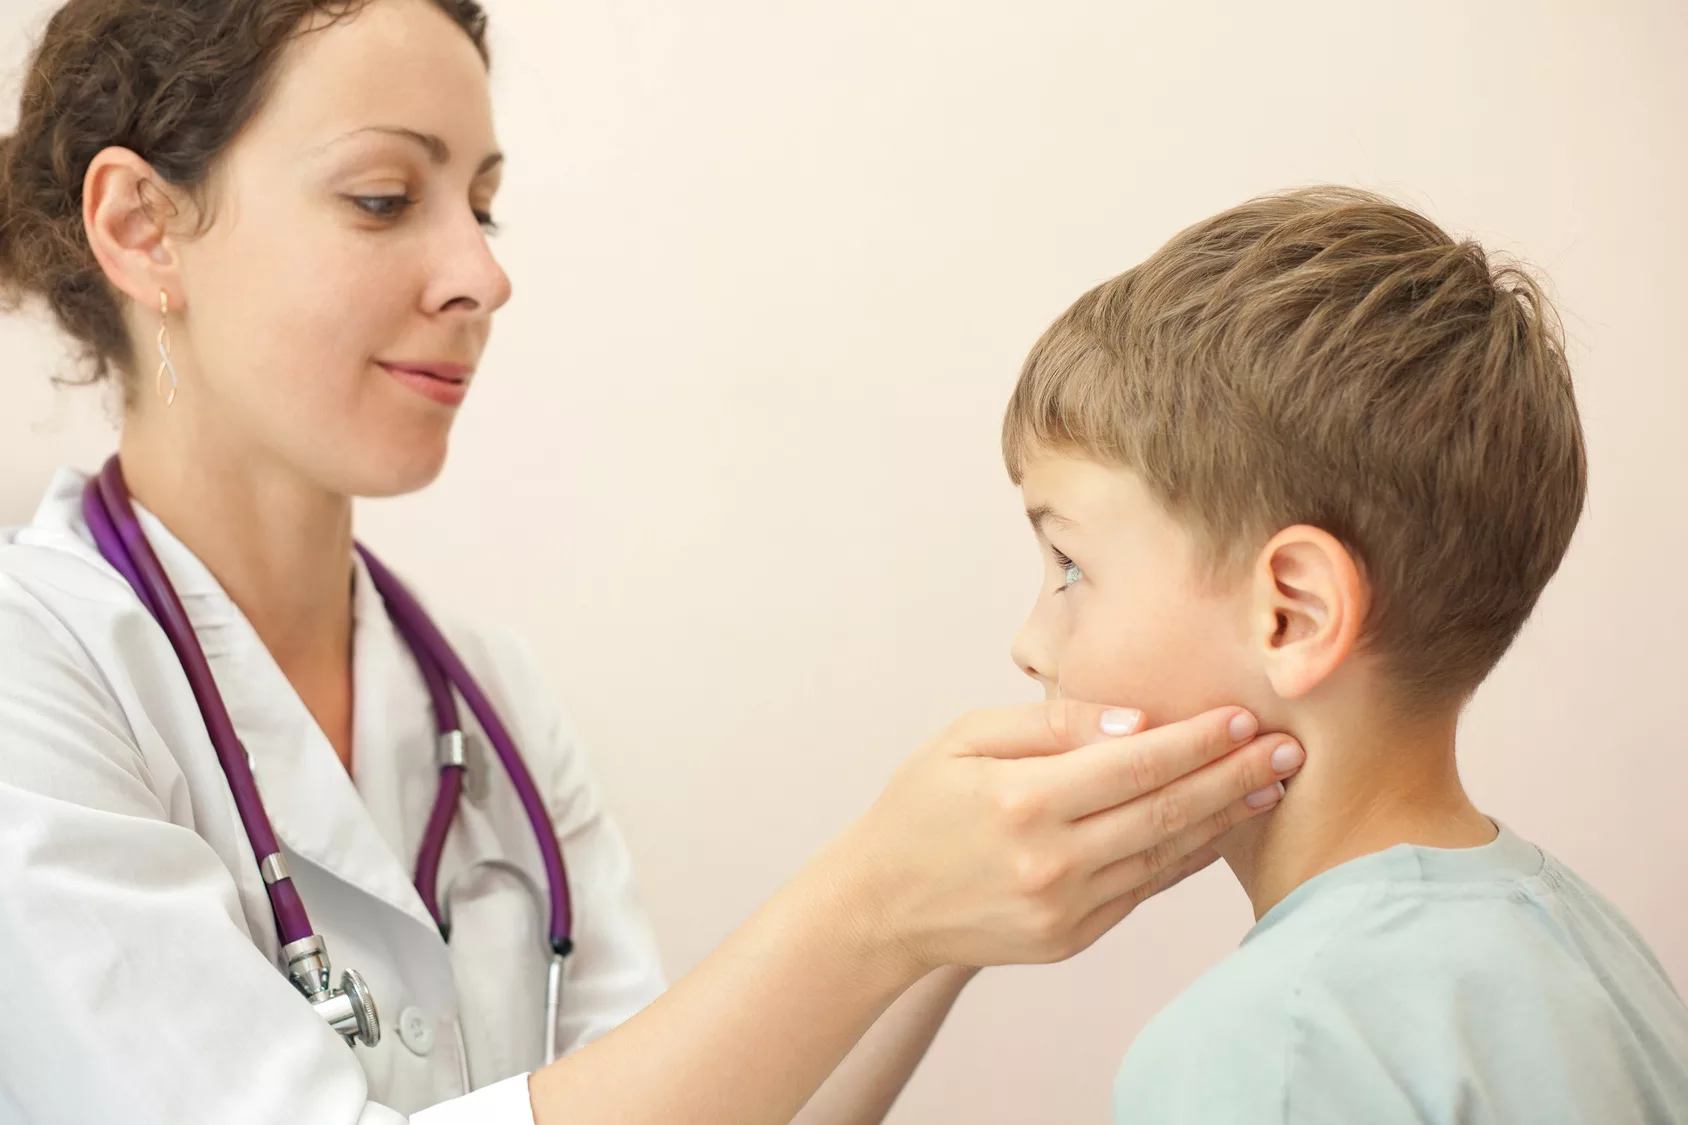 3 Things to Do for Children to Prevent Infections